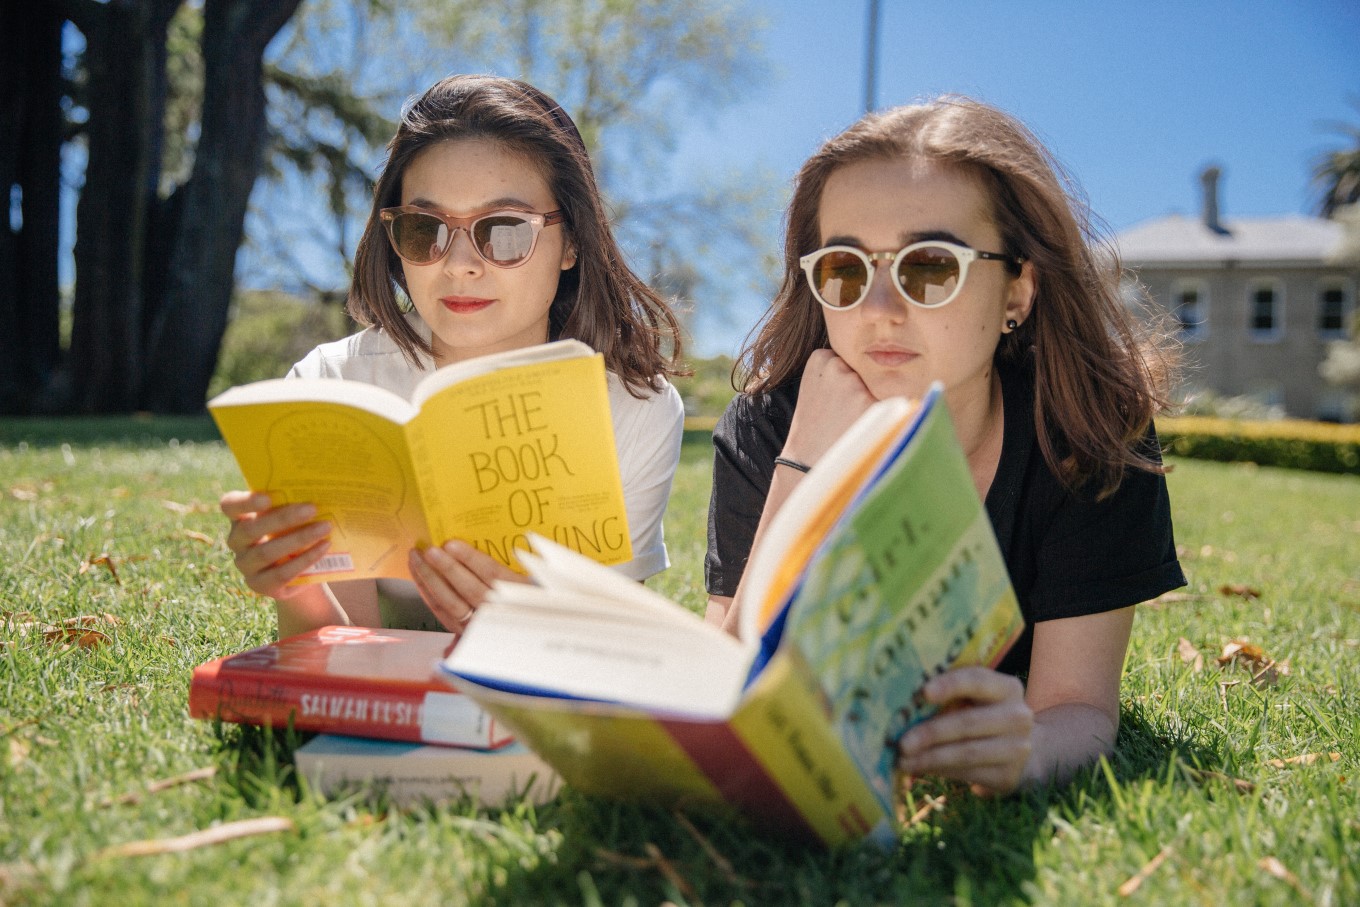 Try reading in your local park